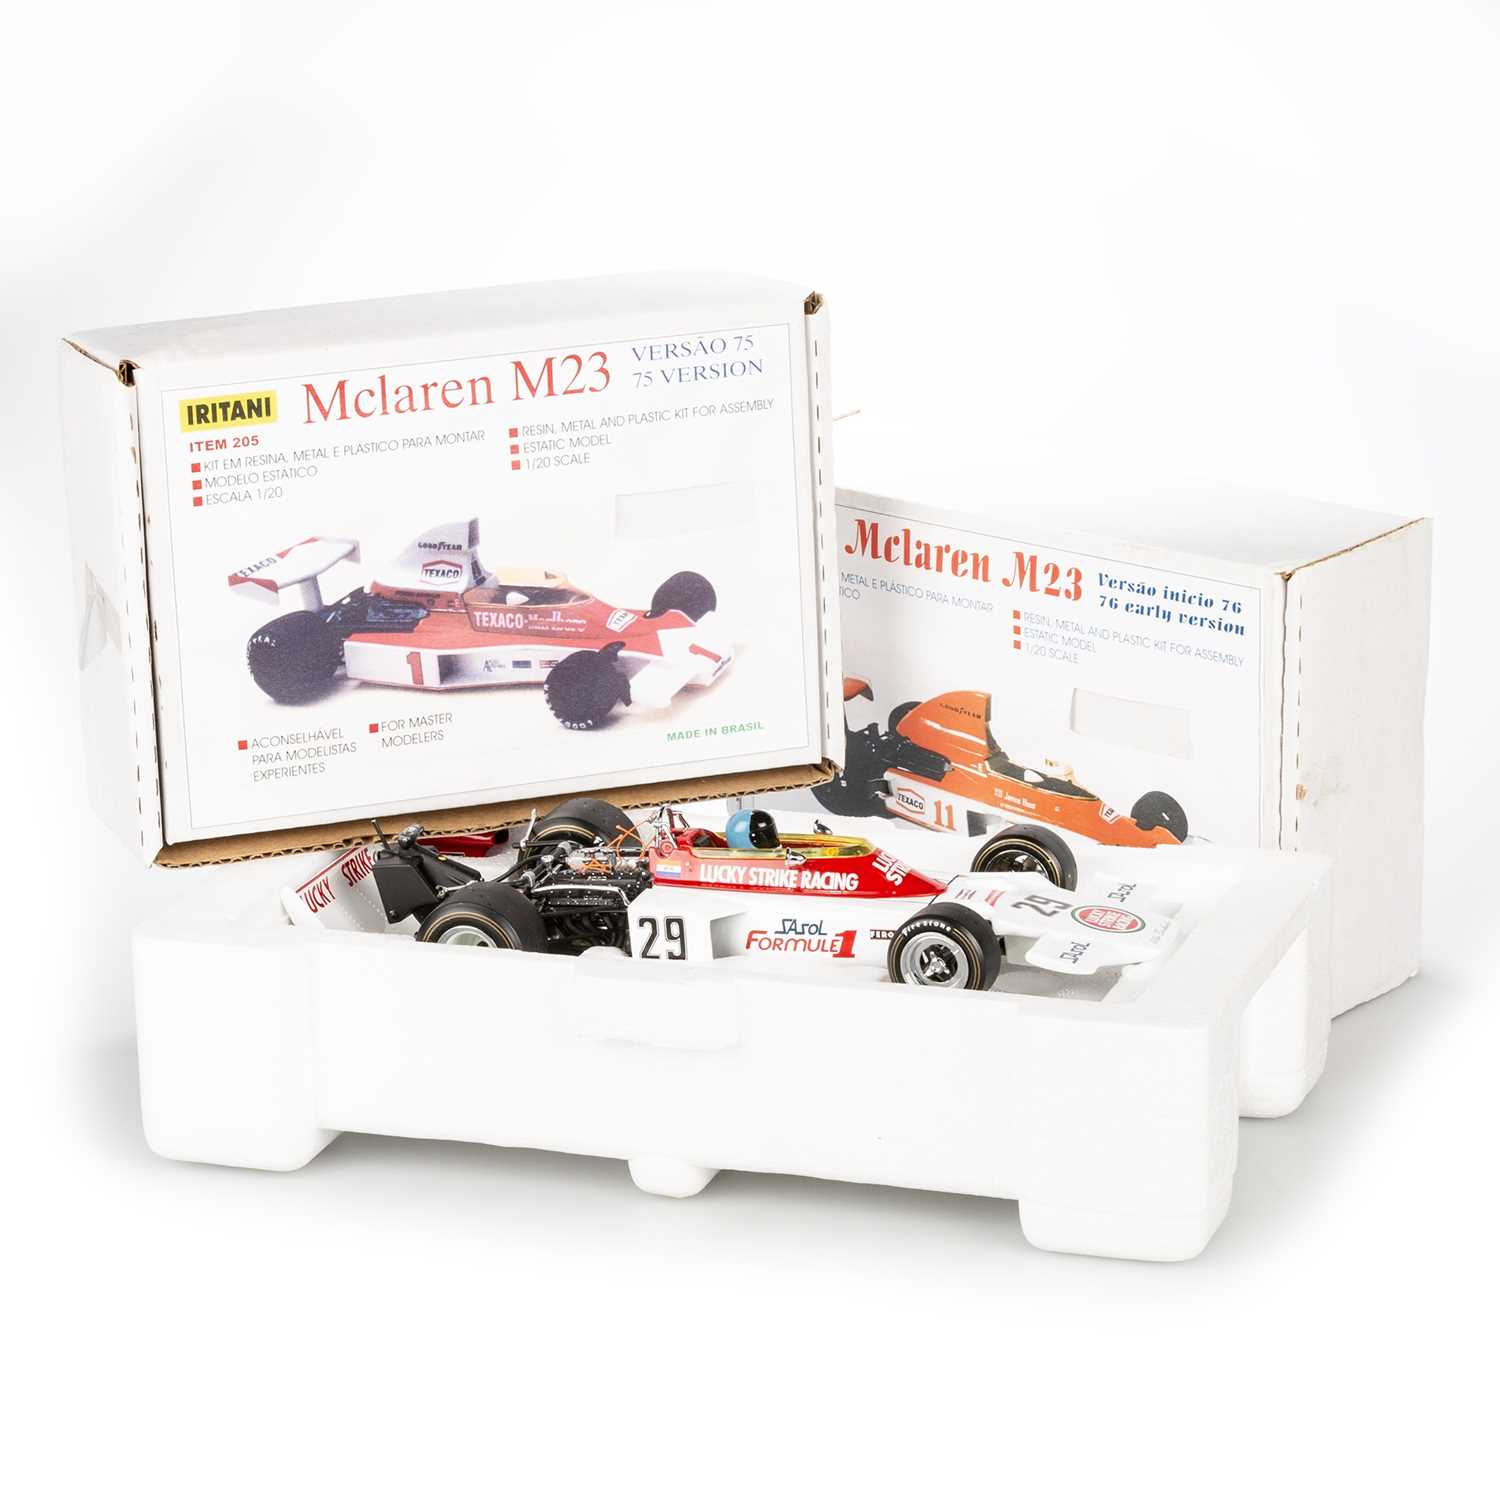 ASSORTED MODEL KIT RACING CARS AND ENGINES - Image 3 of 6